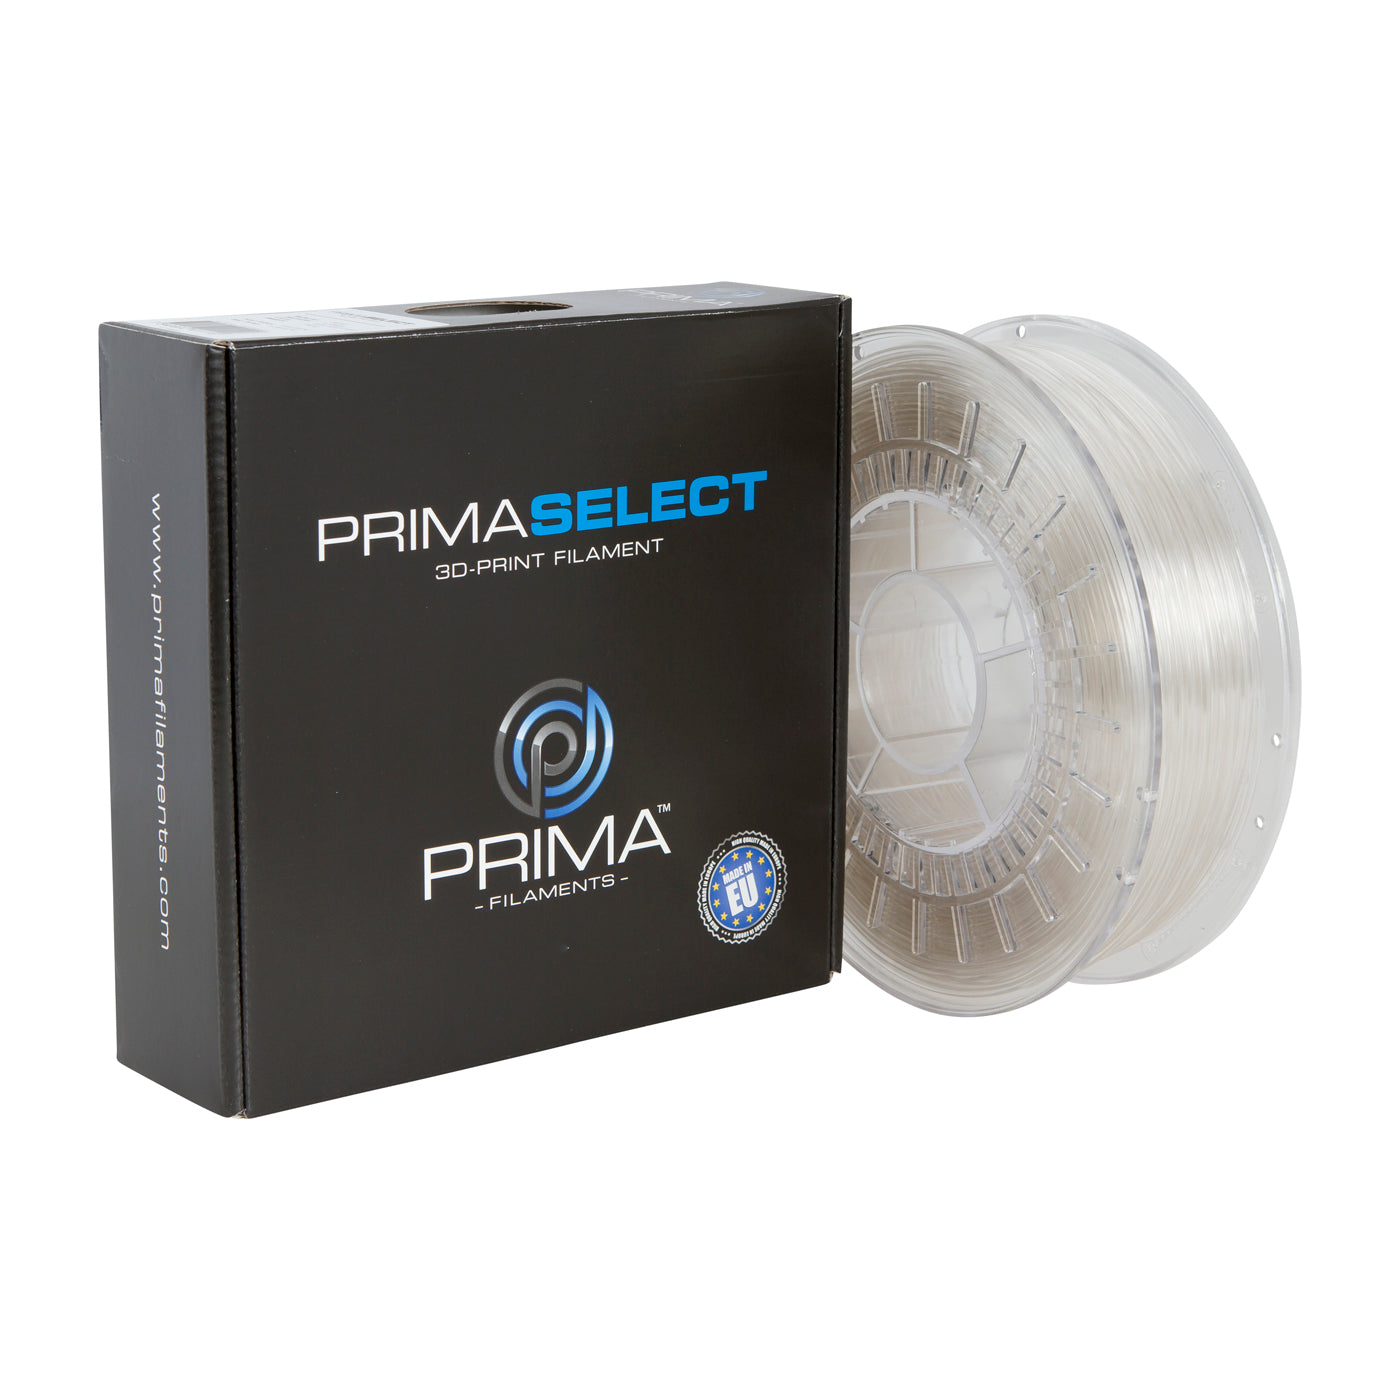 PrimaSelect - PETG - Clear - 2.85mm - 750g